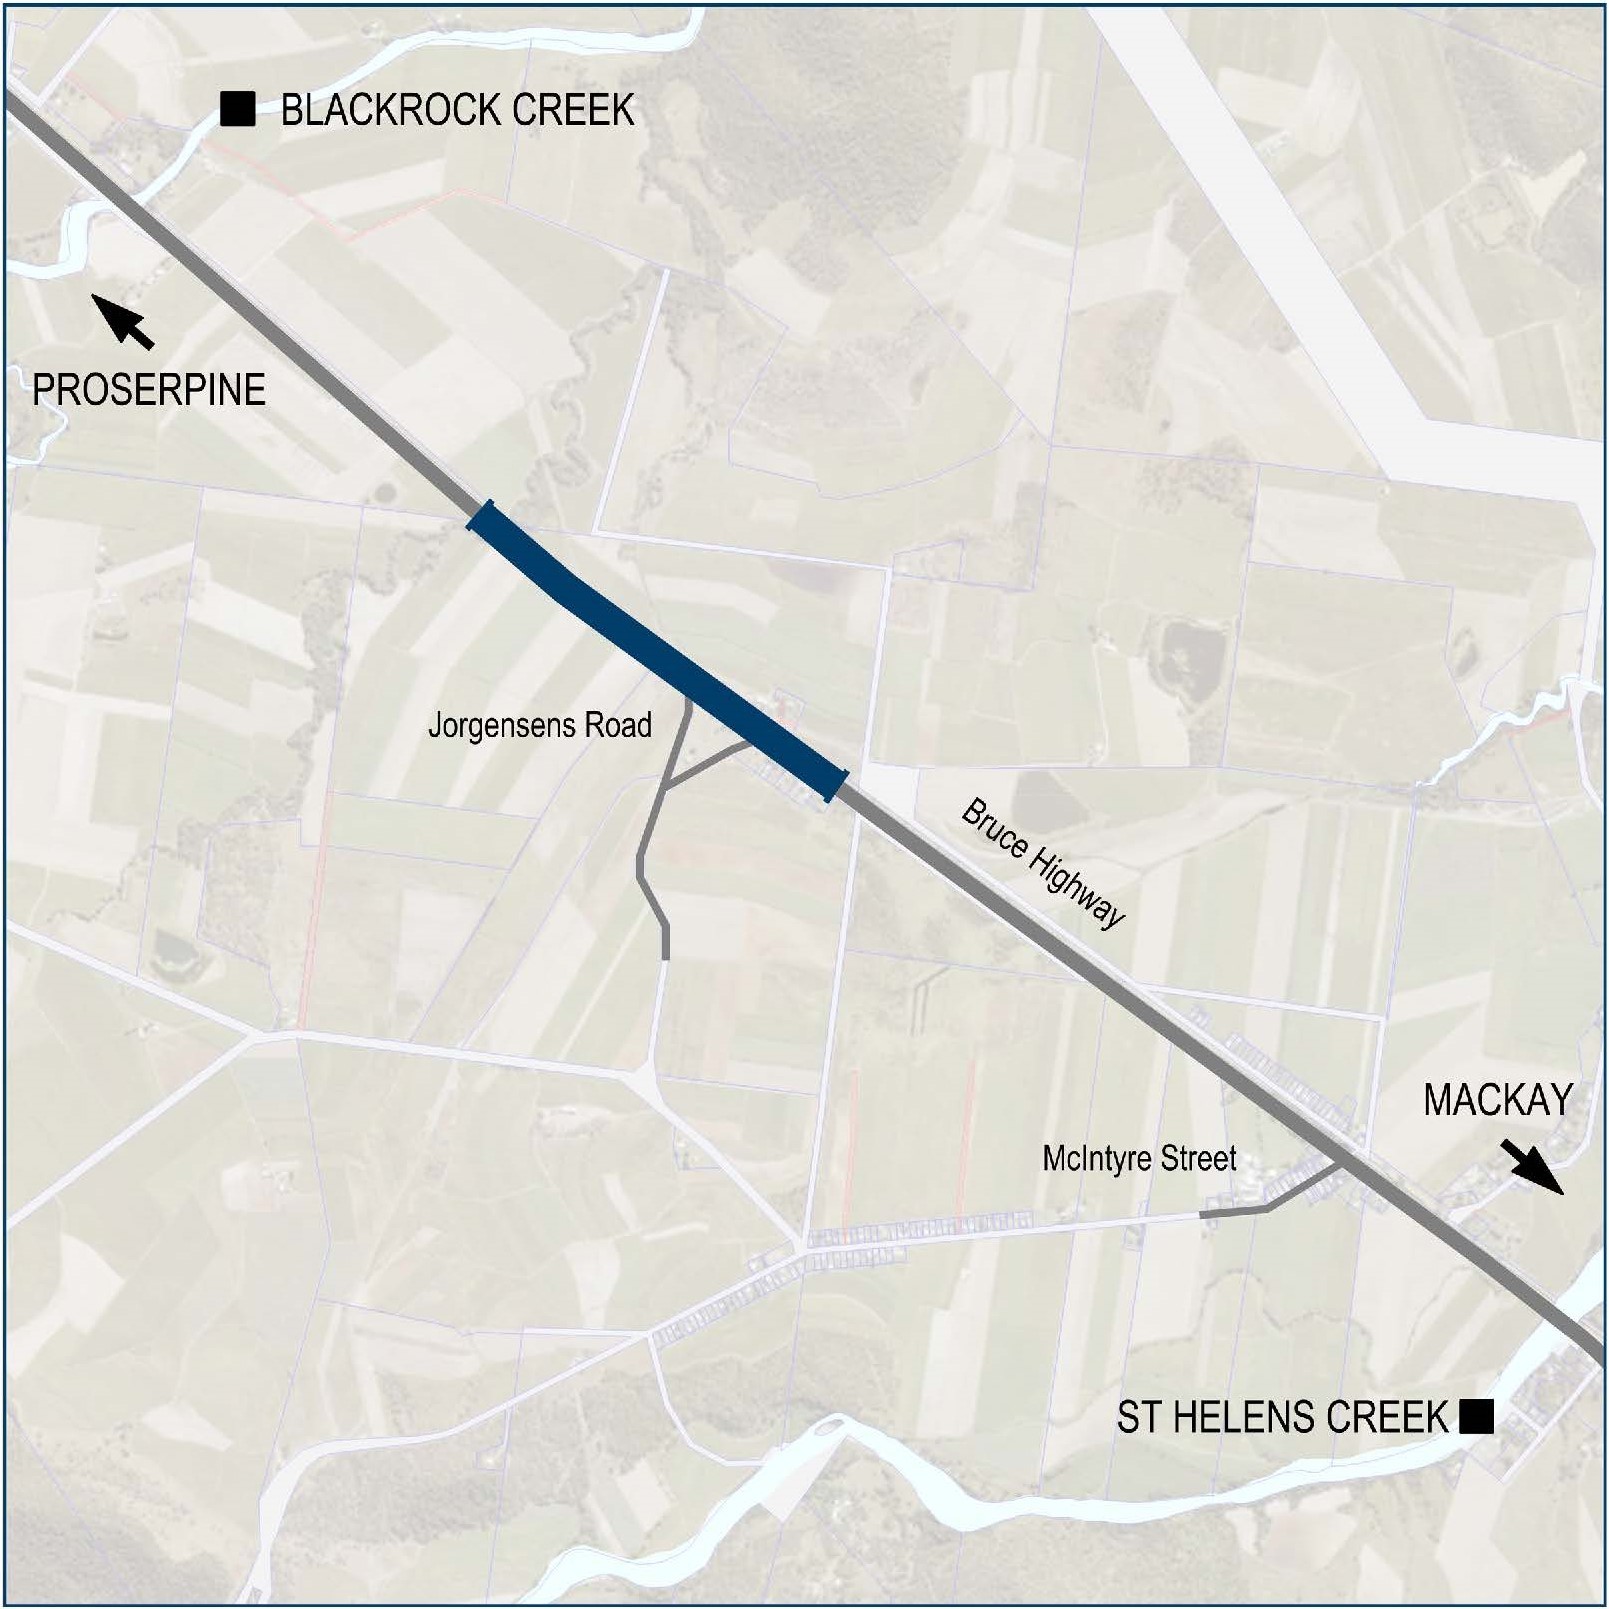 Location of map where works will be completed on Bruce Highway (Mackay - Proserpine), Jumper Creek, upgrade flood immunity project.